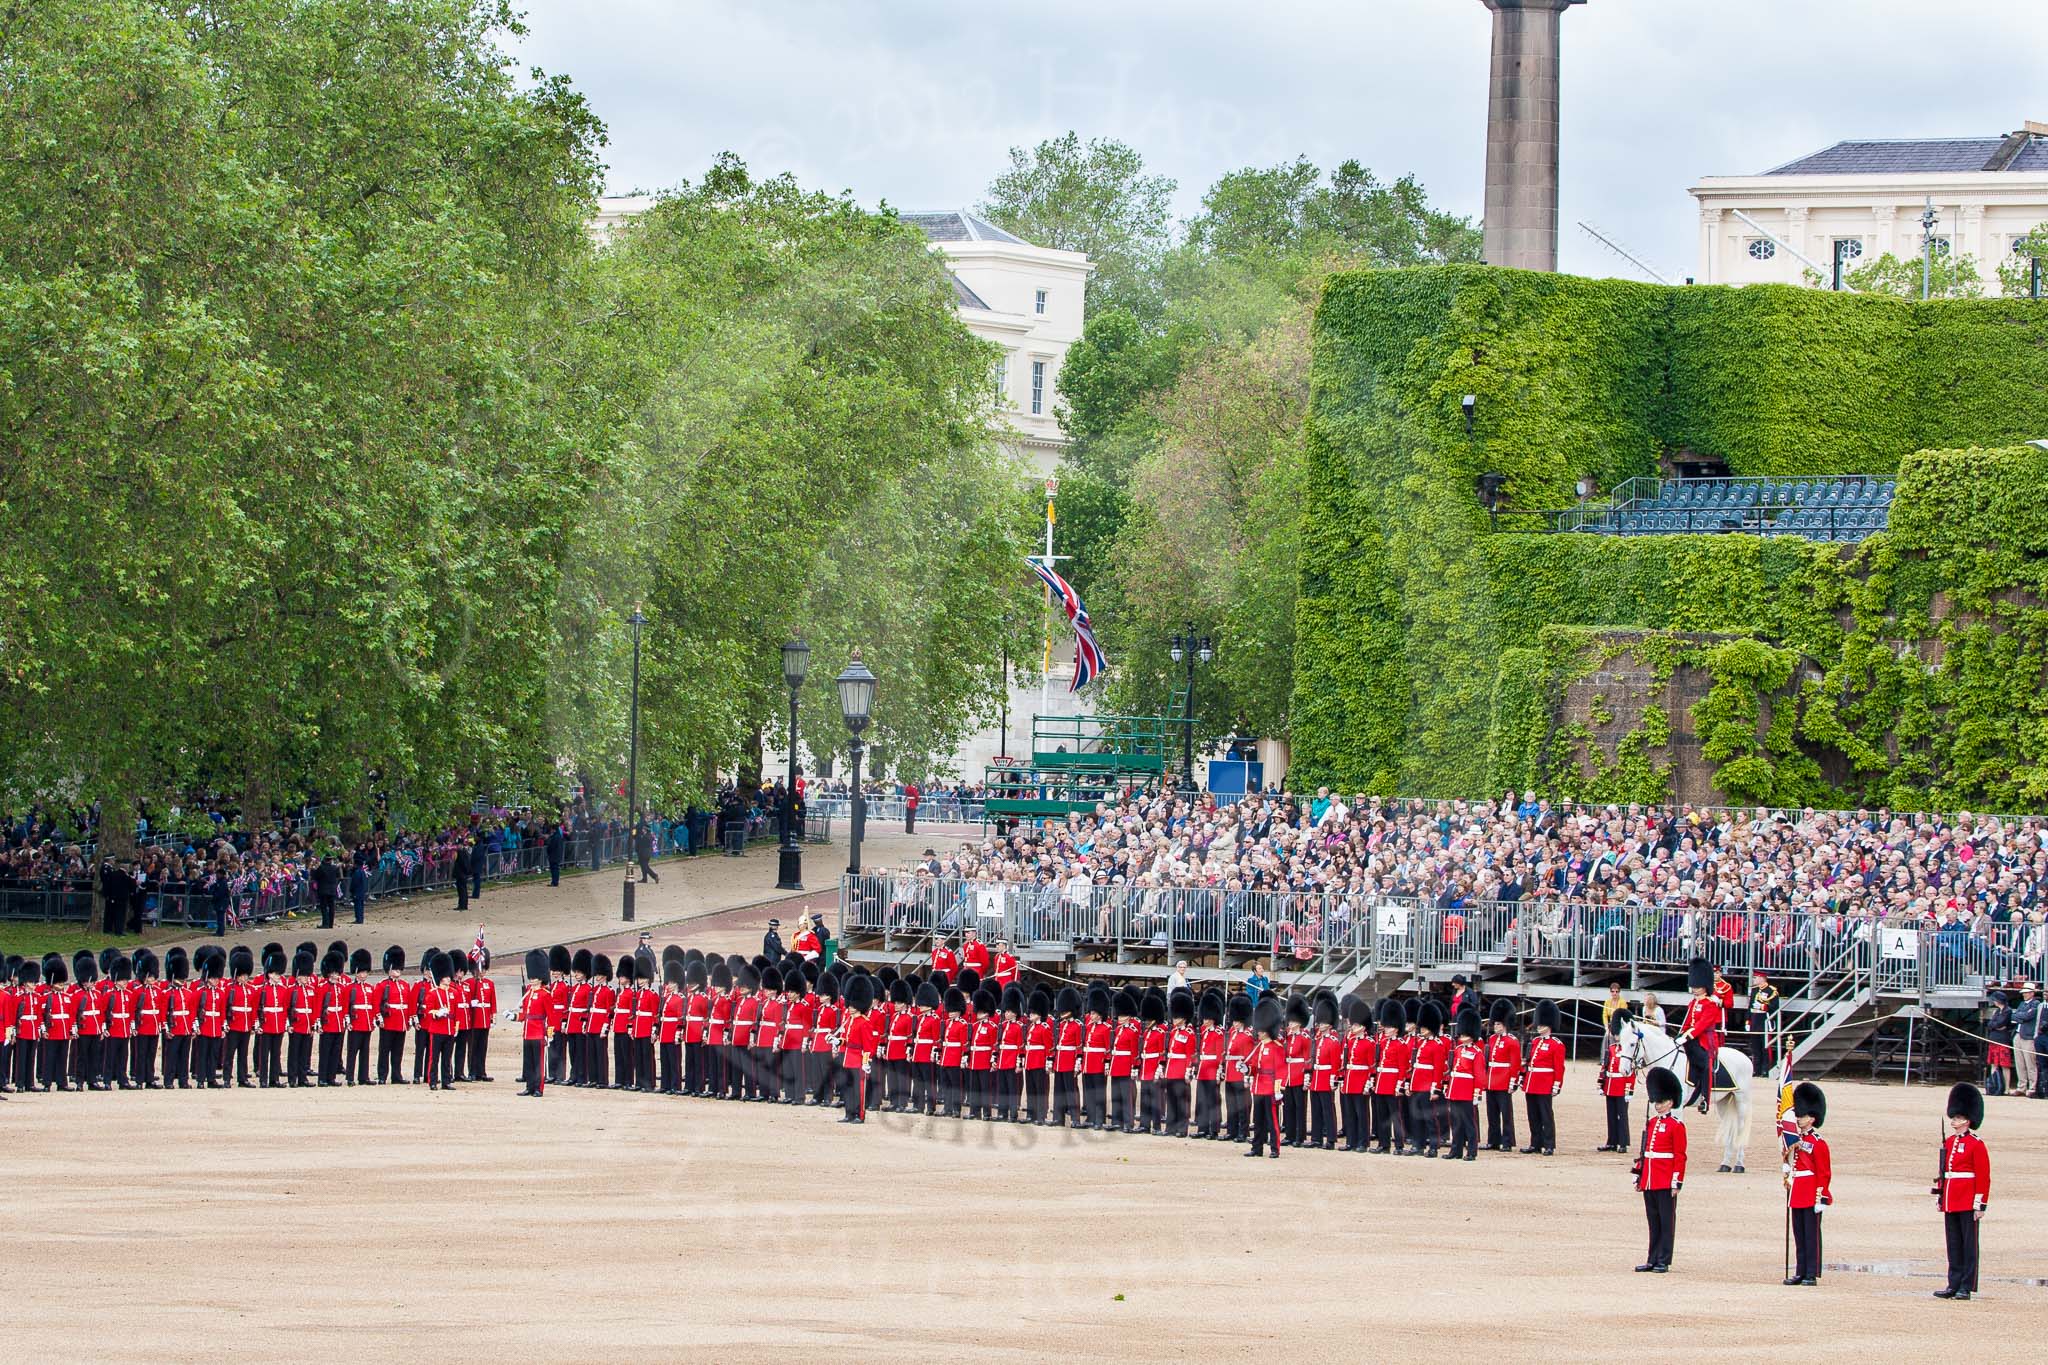 The Colonel's Review 2012: The Northern (St James's Park) side of Horse Guards Parade, with the road leading to the Mall on the left of the grandstand. On the very right of the photo: The Colour Sergeant with the two Ensigns, and the Adjutant of the parade..
Horse Guards Parade, Westminster,
London SW1,

United Kingdom,
on 09 June 2012 at 10:42, image #113